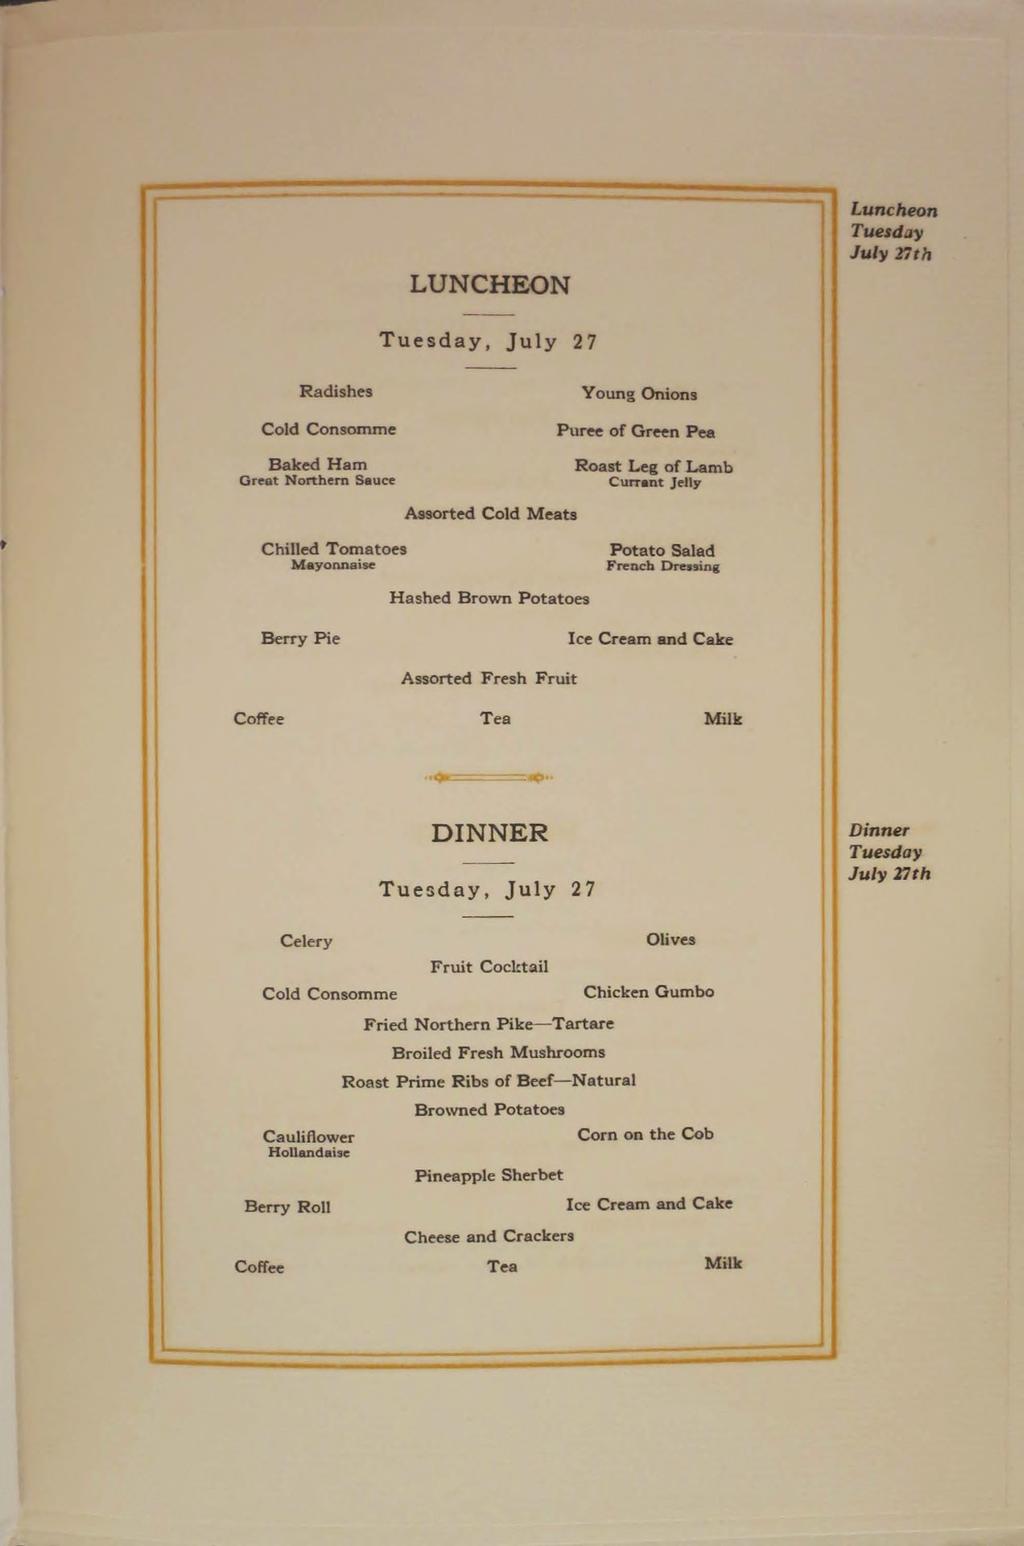 LUNCHEON Luncheon T uesday July 27th Tuesday, July 27 Radishes Cold Consomme Baked Ham Great Northern Sauce Young Onions Puree of Green Pea Roast Leg of Lamb Currant Jelly Assorted Cold Meats Chilled